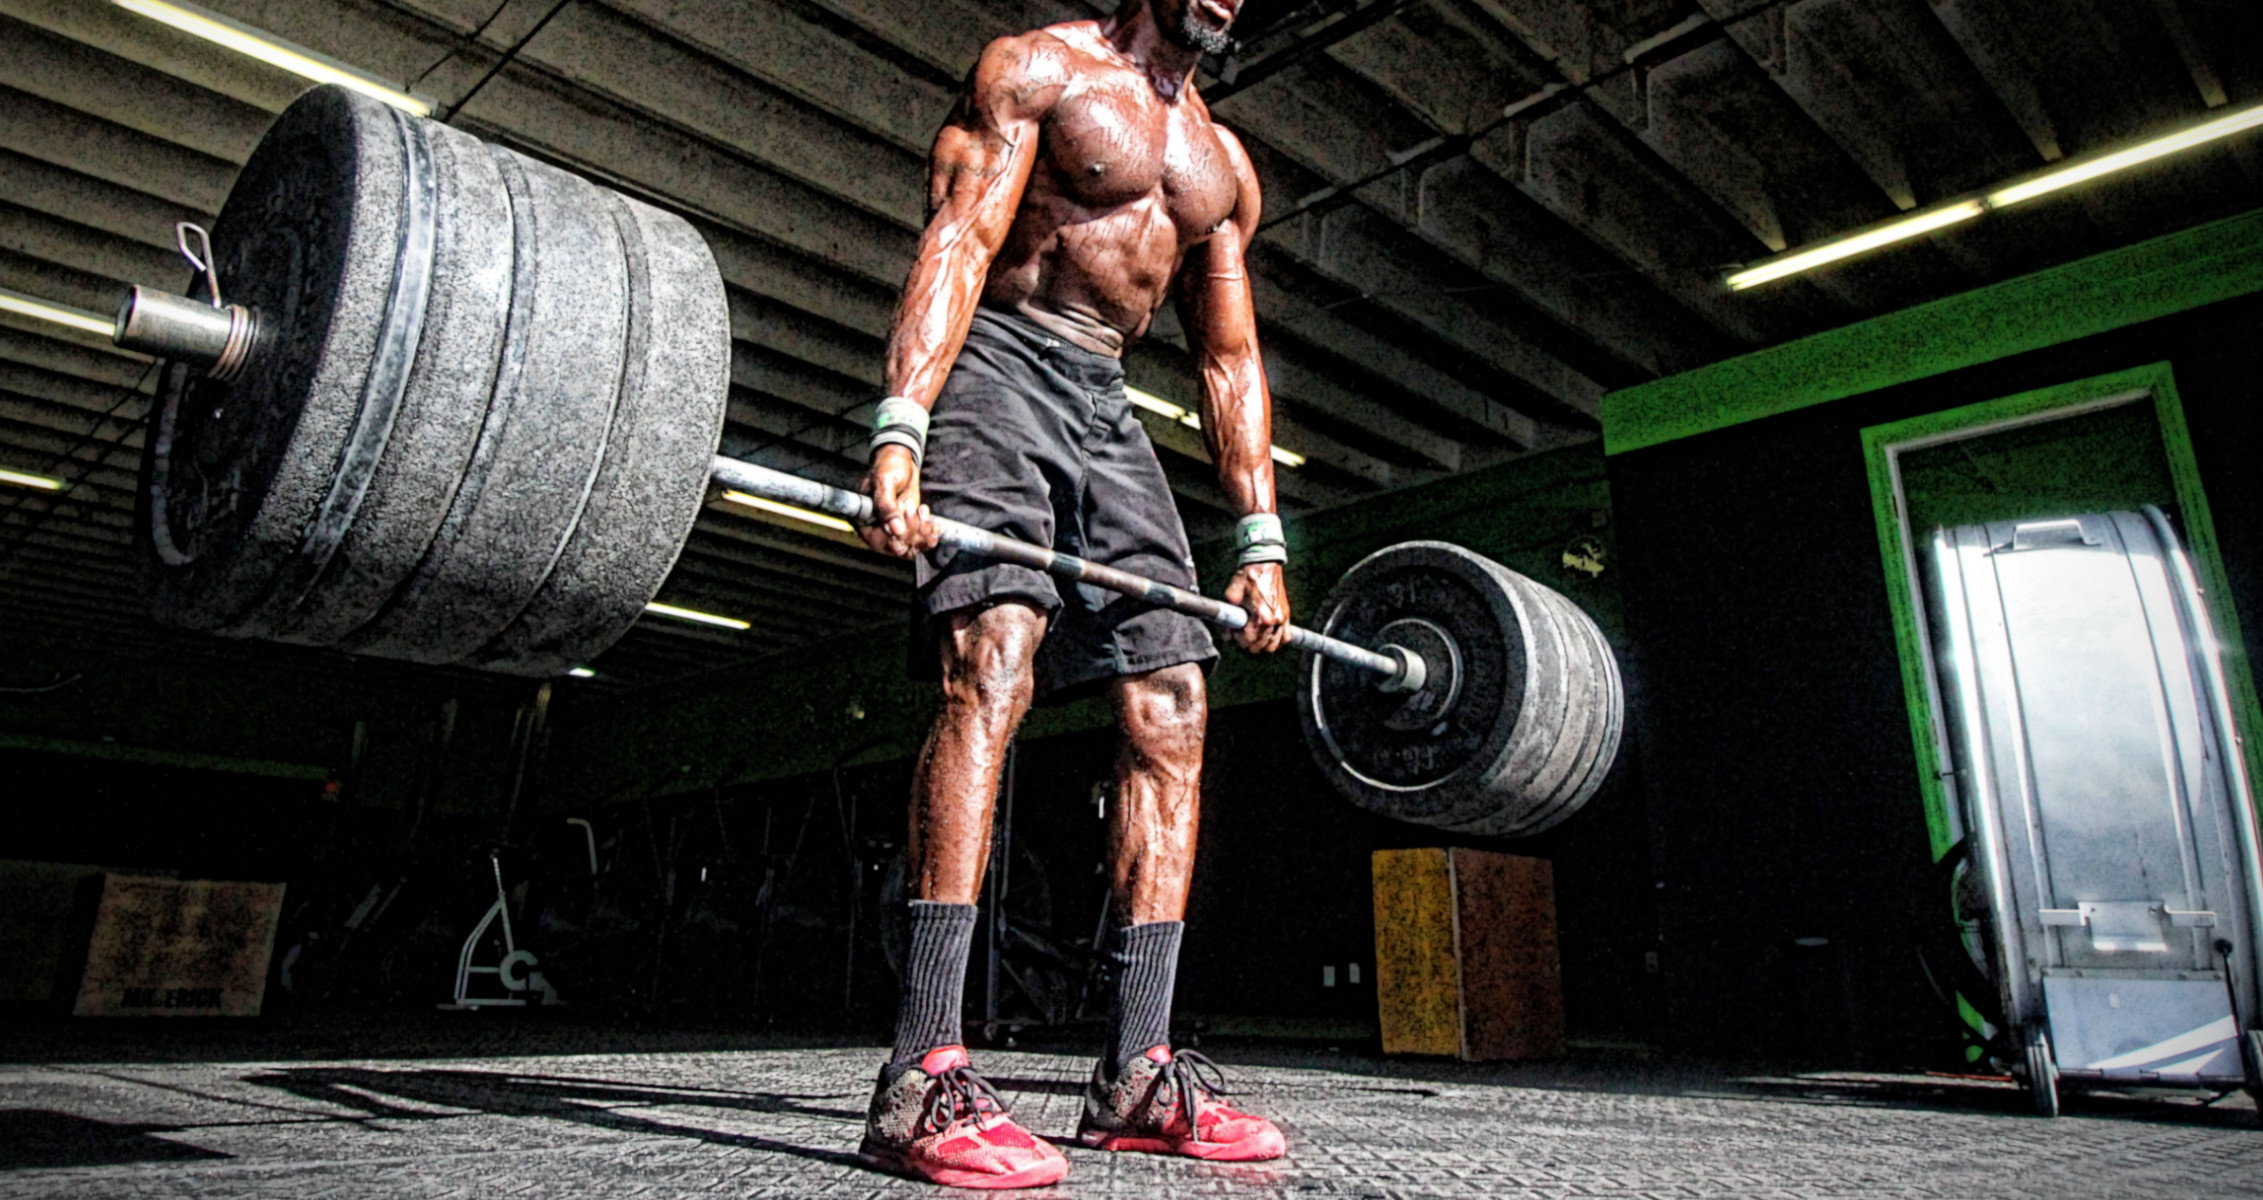 9 Leg Day Mistakes You Might Be Making That Could Be Holding You Back